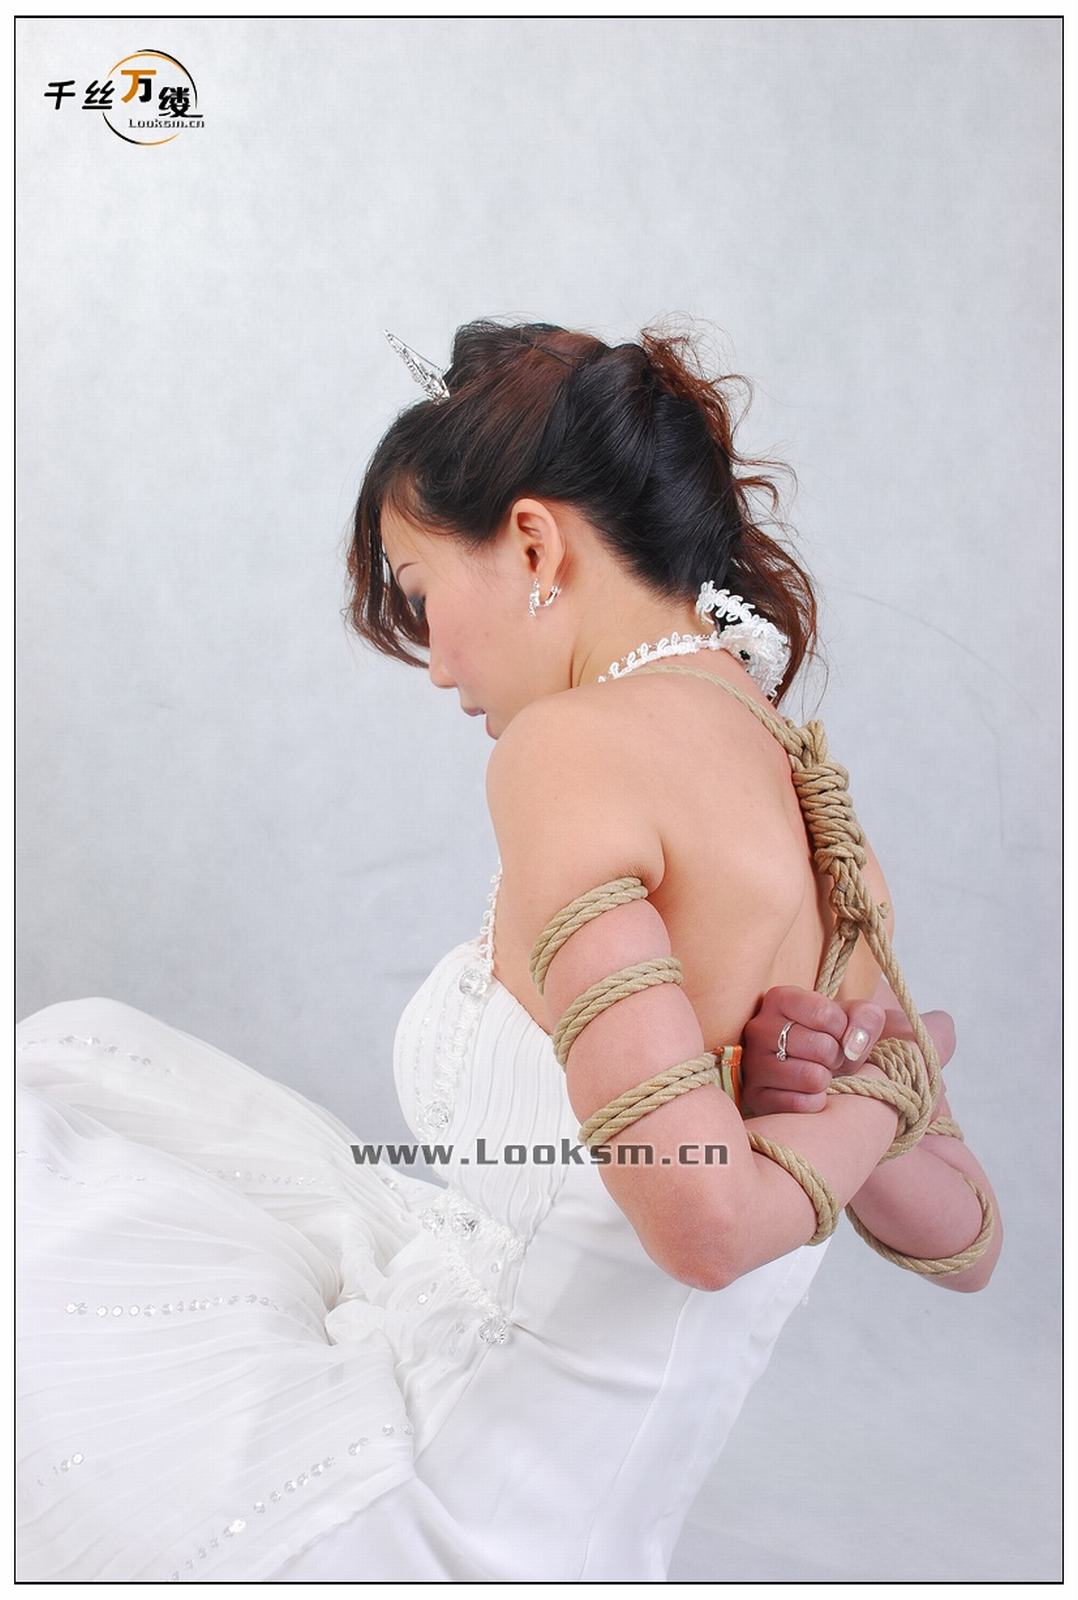 Chinese Rope Model 203